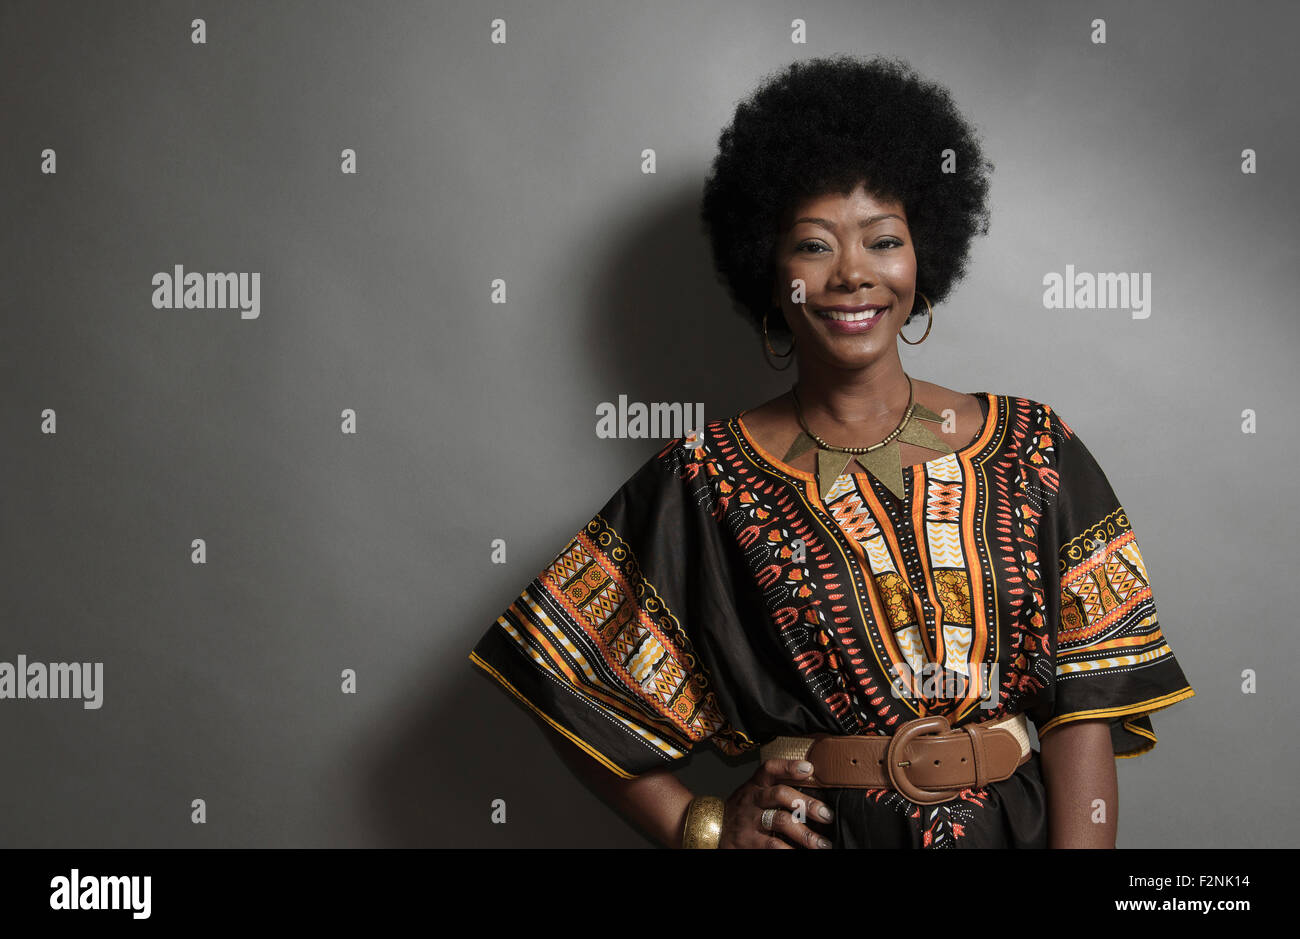 African American woman smiling with hand on hip Stock Photo